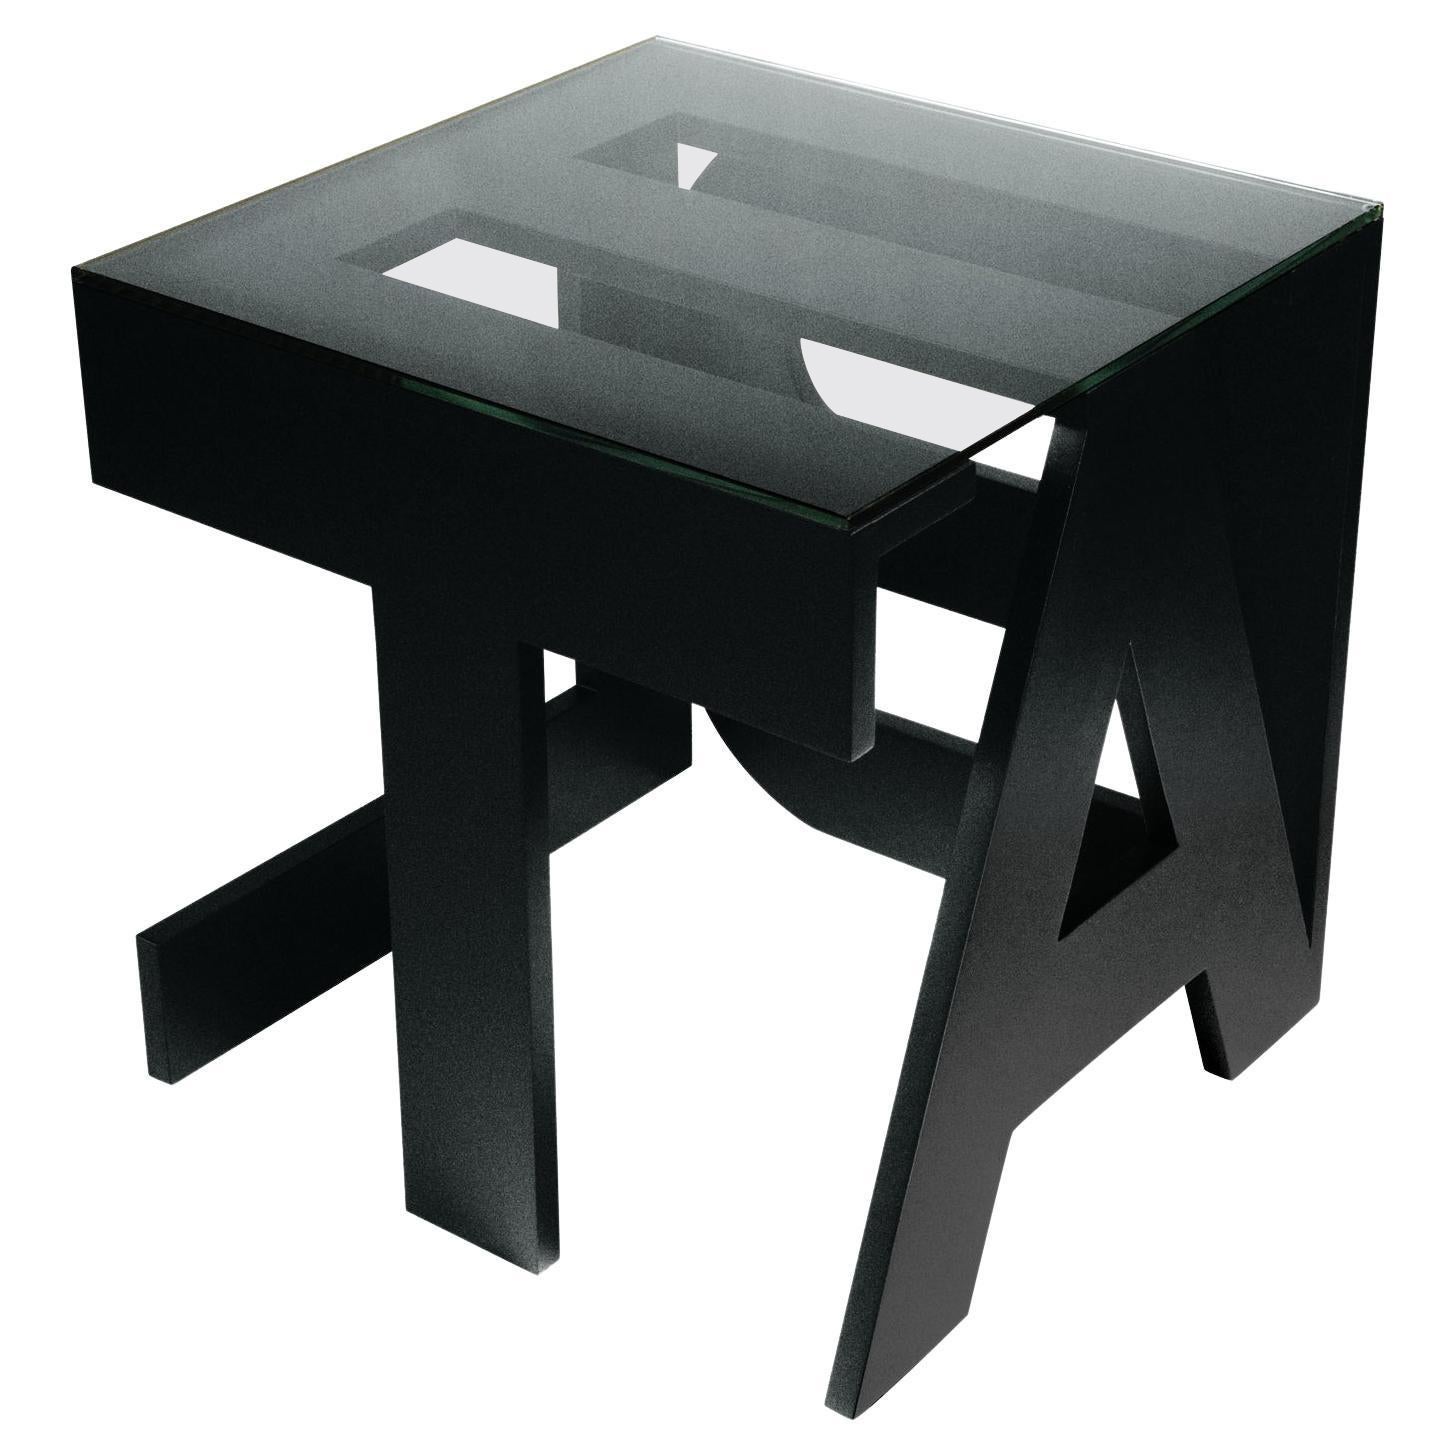 Black "Table" Table by Roberta Rampazzo For Sale